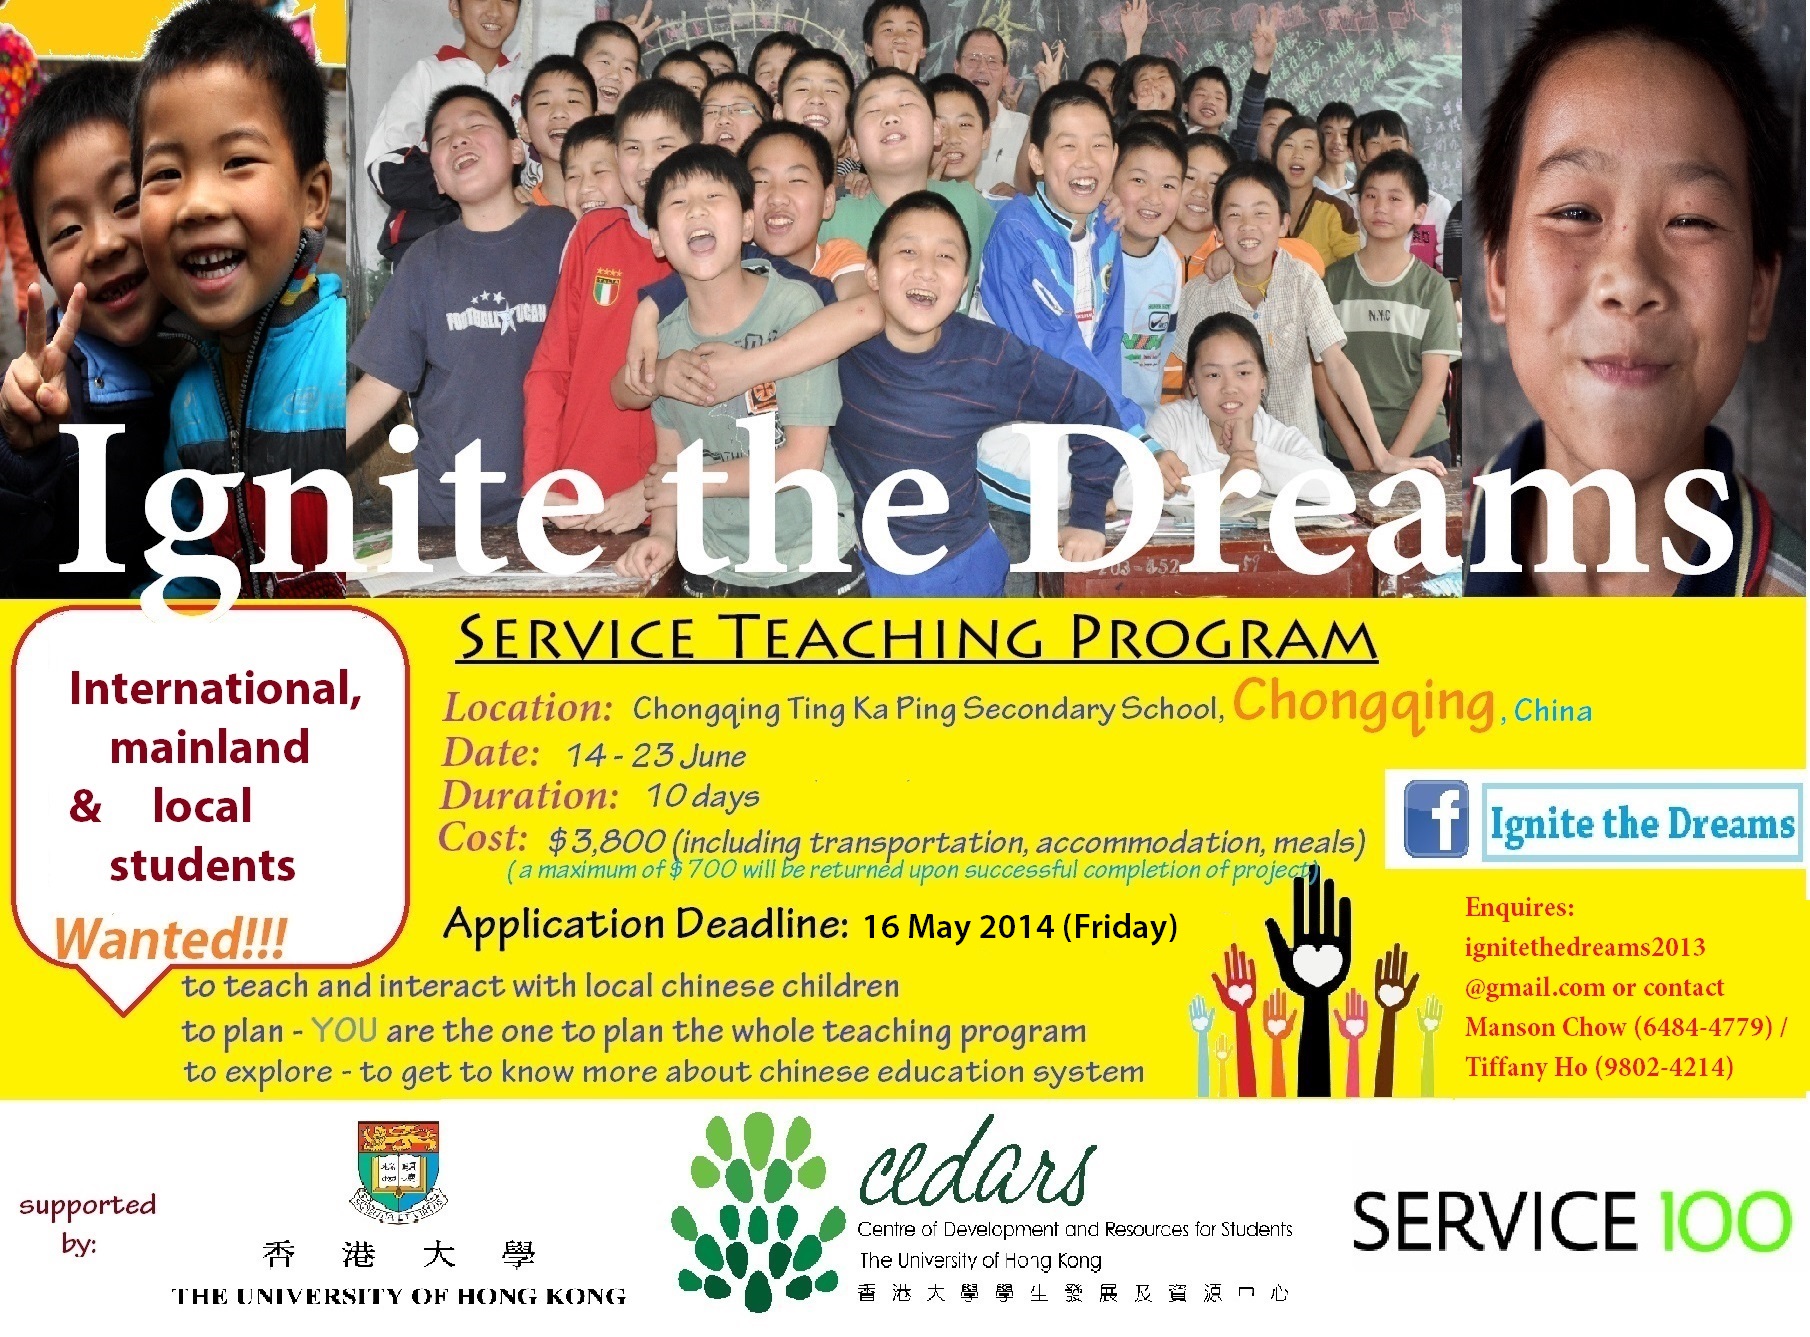 Visit our facebook page for more information: Ignite the Dreams